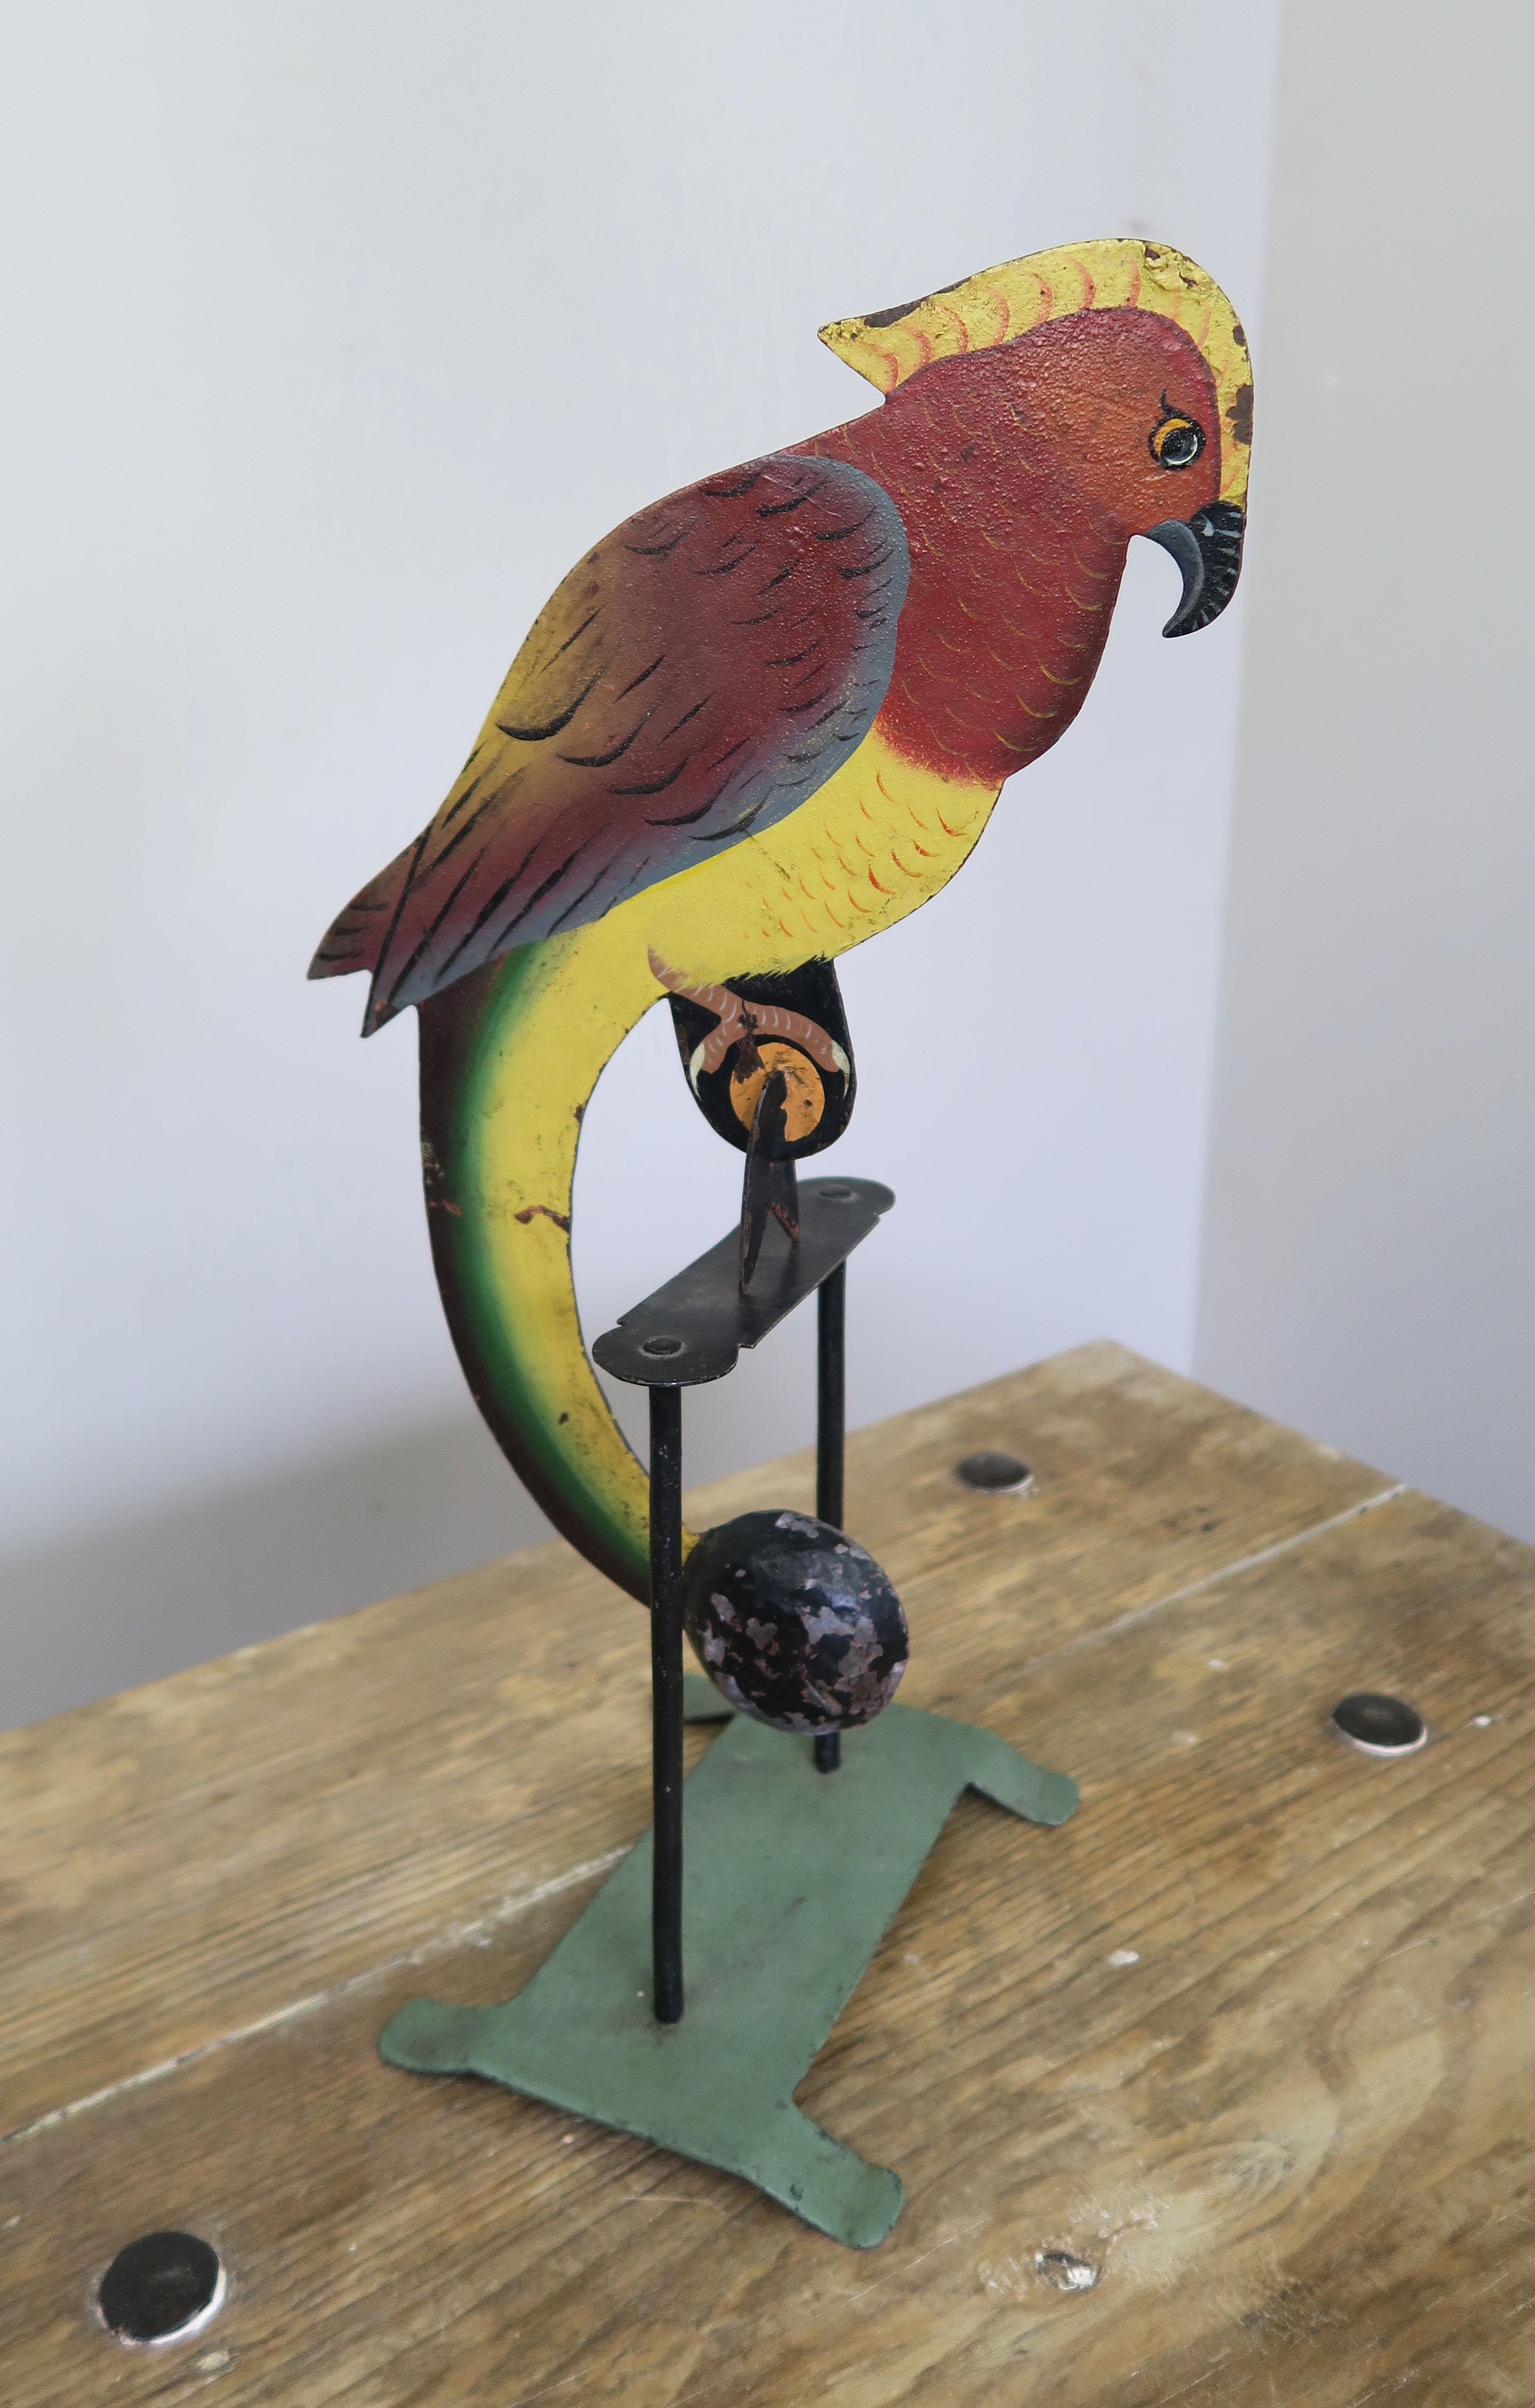 Charming American folk art piece depicting a balancing parrot perched on his stand. The parrot is perfectly weighted so with a small push he can swing beautifully on his base for fun entertainment for the whole family. They also are collectible.